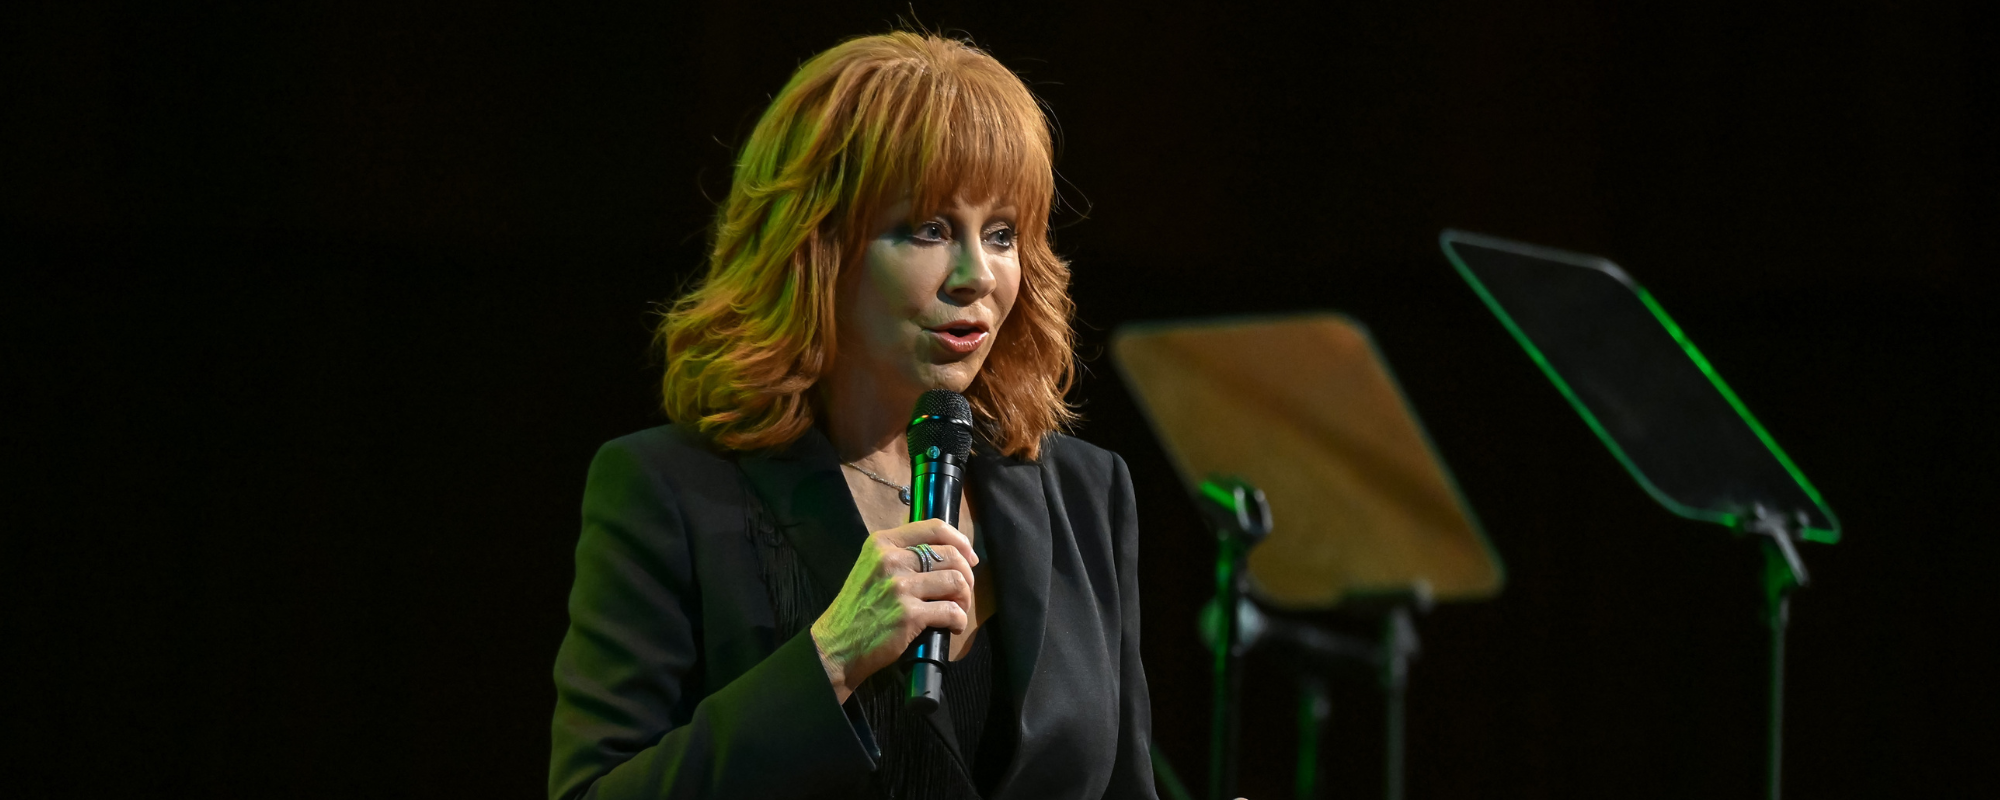 Behind the Endearing Meaning of “I’m A Survivor” by Reba McEntire